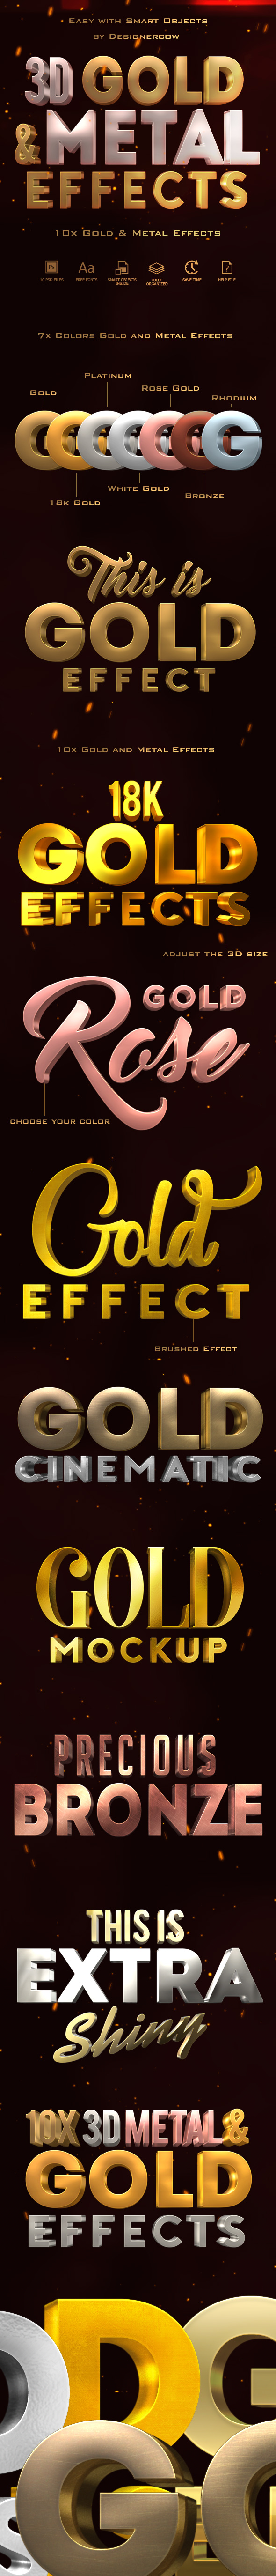 3D Gold and Metal Effects